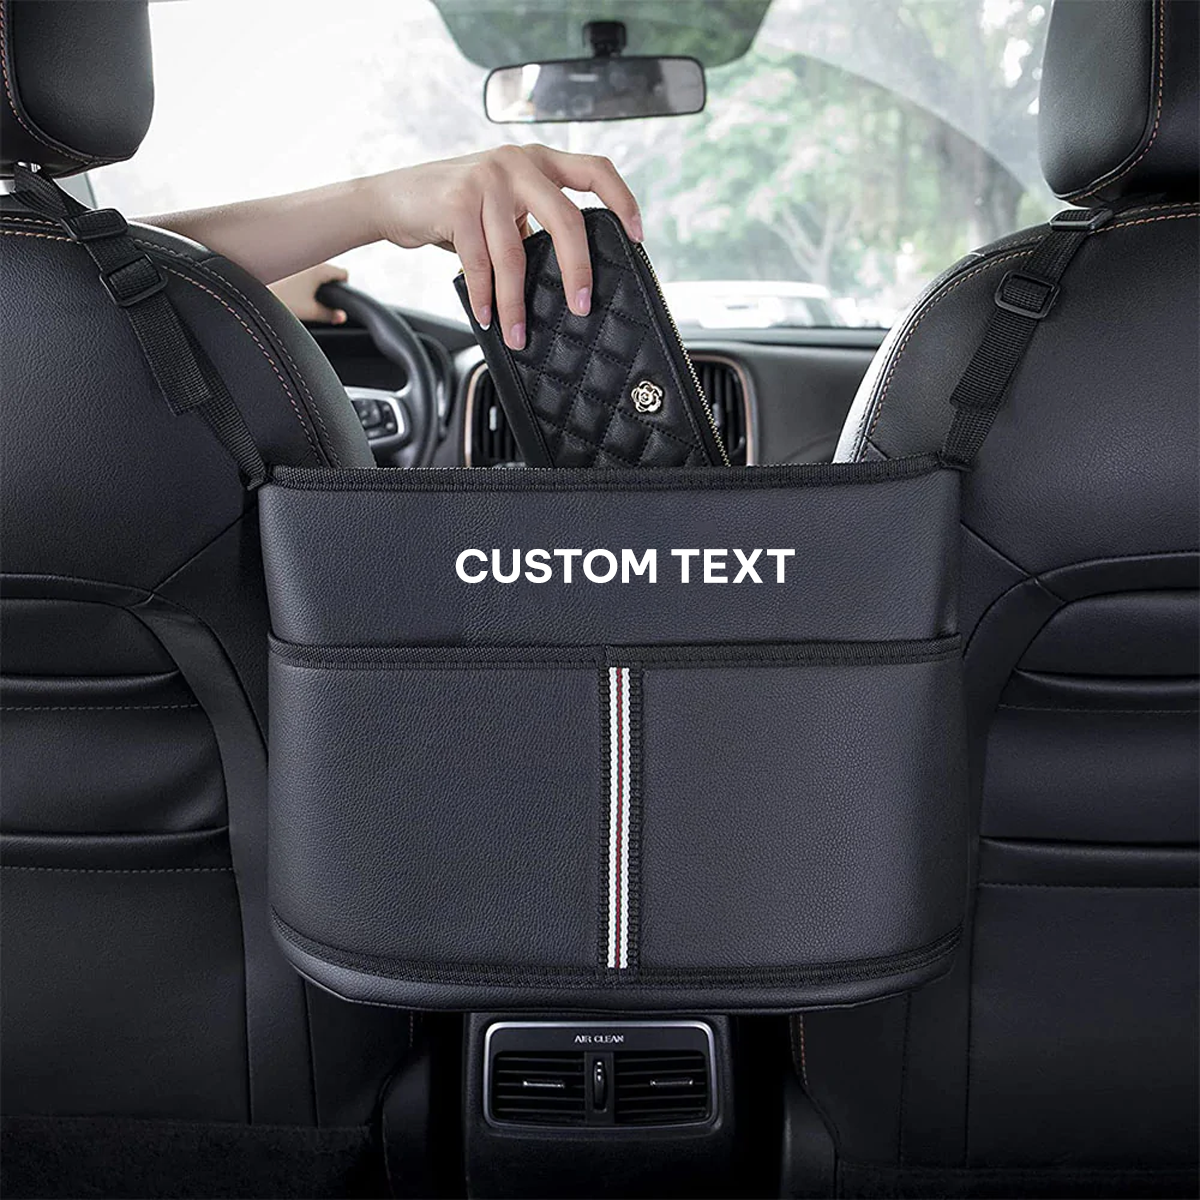 Custom Text For Car Purse Holder for Car Handbag Holder Between Seats Premium PU Leather, Compatible with All Cars, Auto Driver Or Passenger Accessories Organizer, Hanging Car Purse Storage Pocket Back Seat Pet Barrier TY11991